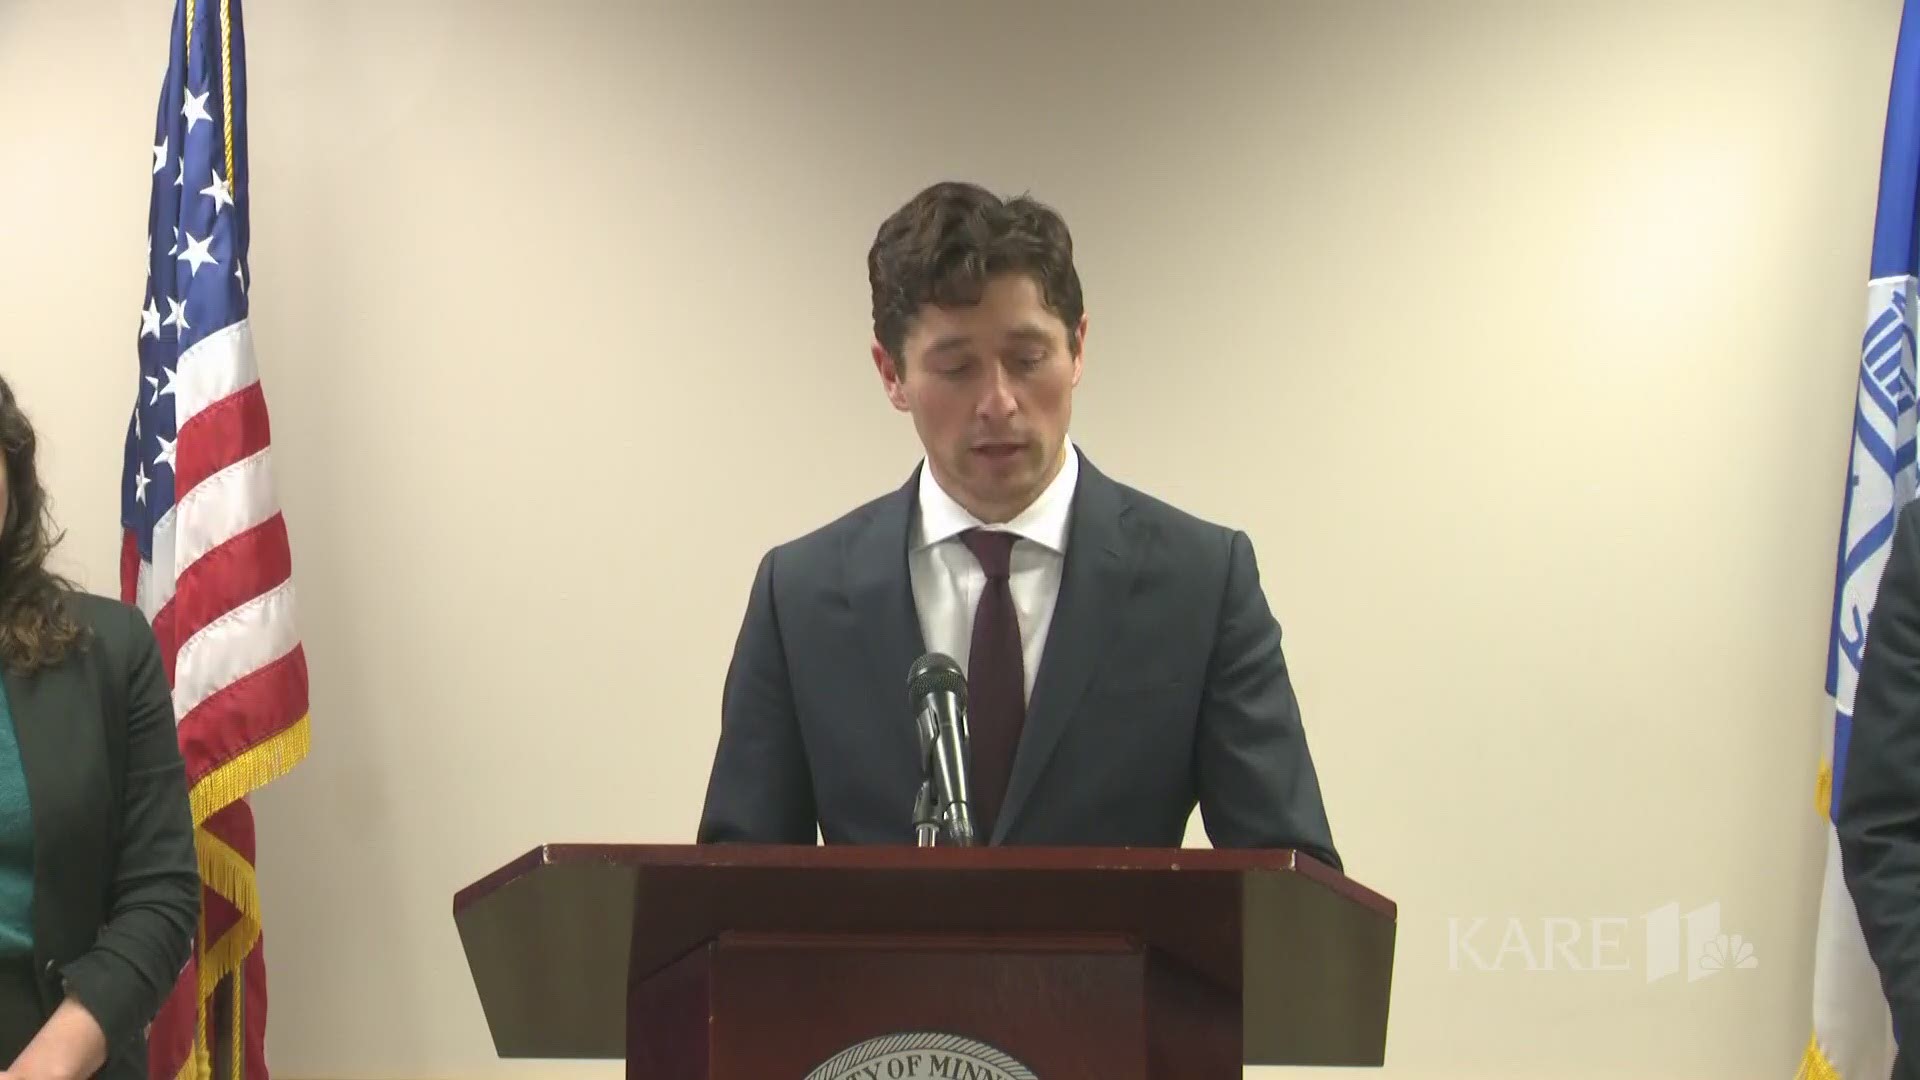 Mayor Jacob Frey announced the settlement Friday afternoon, with Police Chief Medaria Arradondo and the entire city council behind him. While saying he was unable to go into much detail, Frey did say Justine's family will keep $18 million of the settlement, and donate the additional $2 million to the Safe Communities Fund.